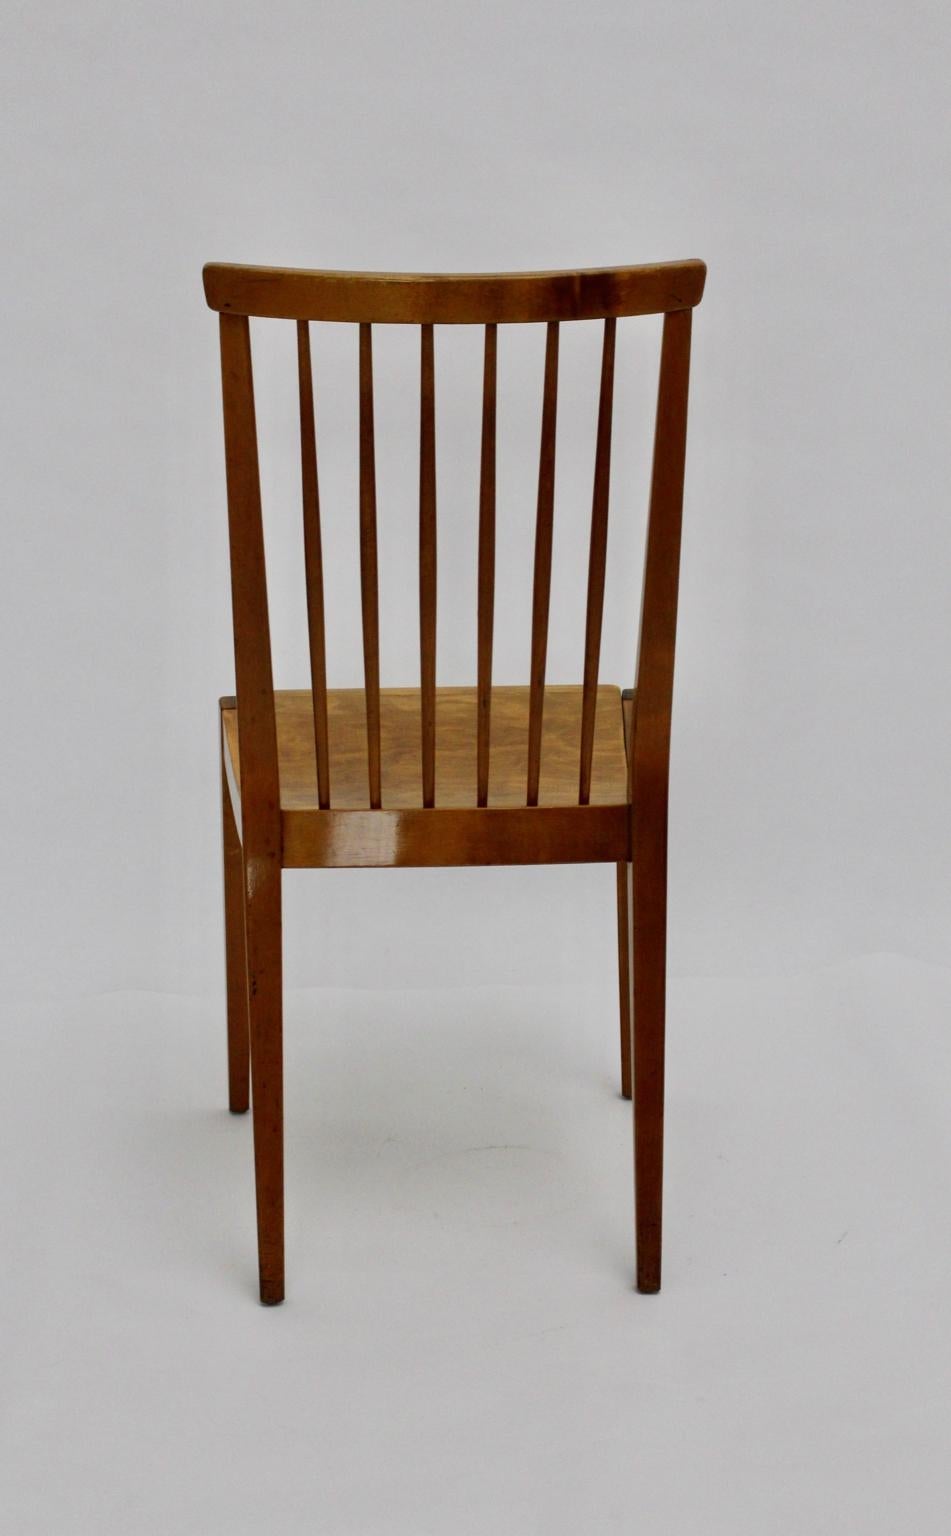 20th Century Brown Mid-Century Modern Maple Tree Chair by Otto Niedermoser for Thonet For Sale